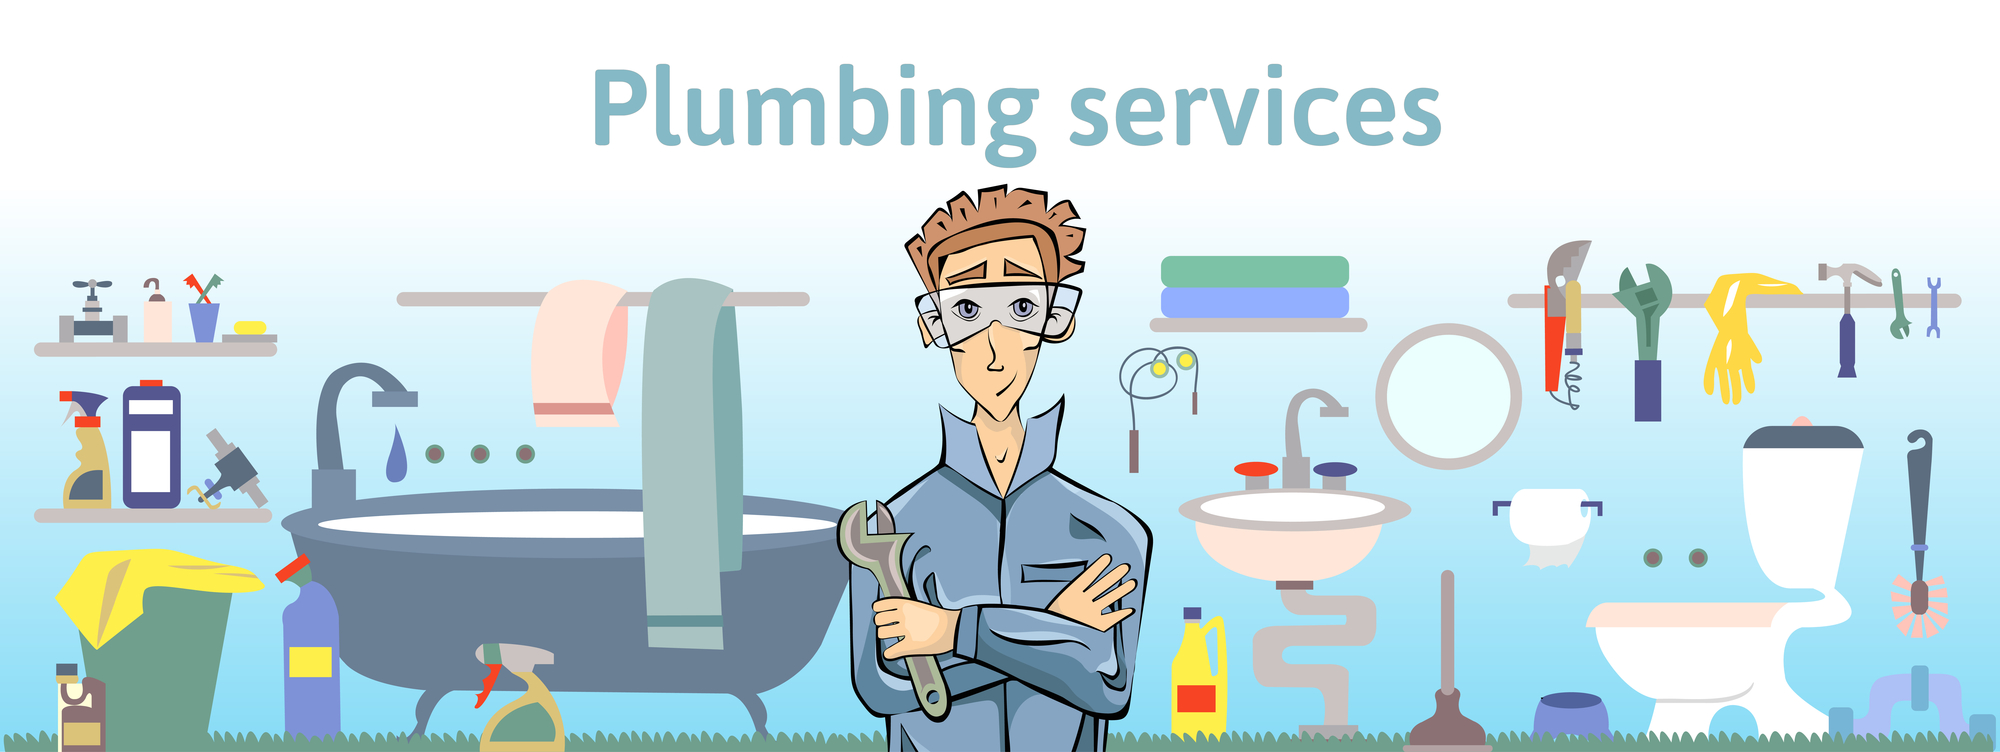 Plumbing Attends to Emergency Plumbing Services